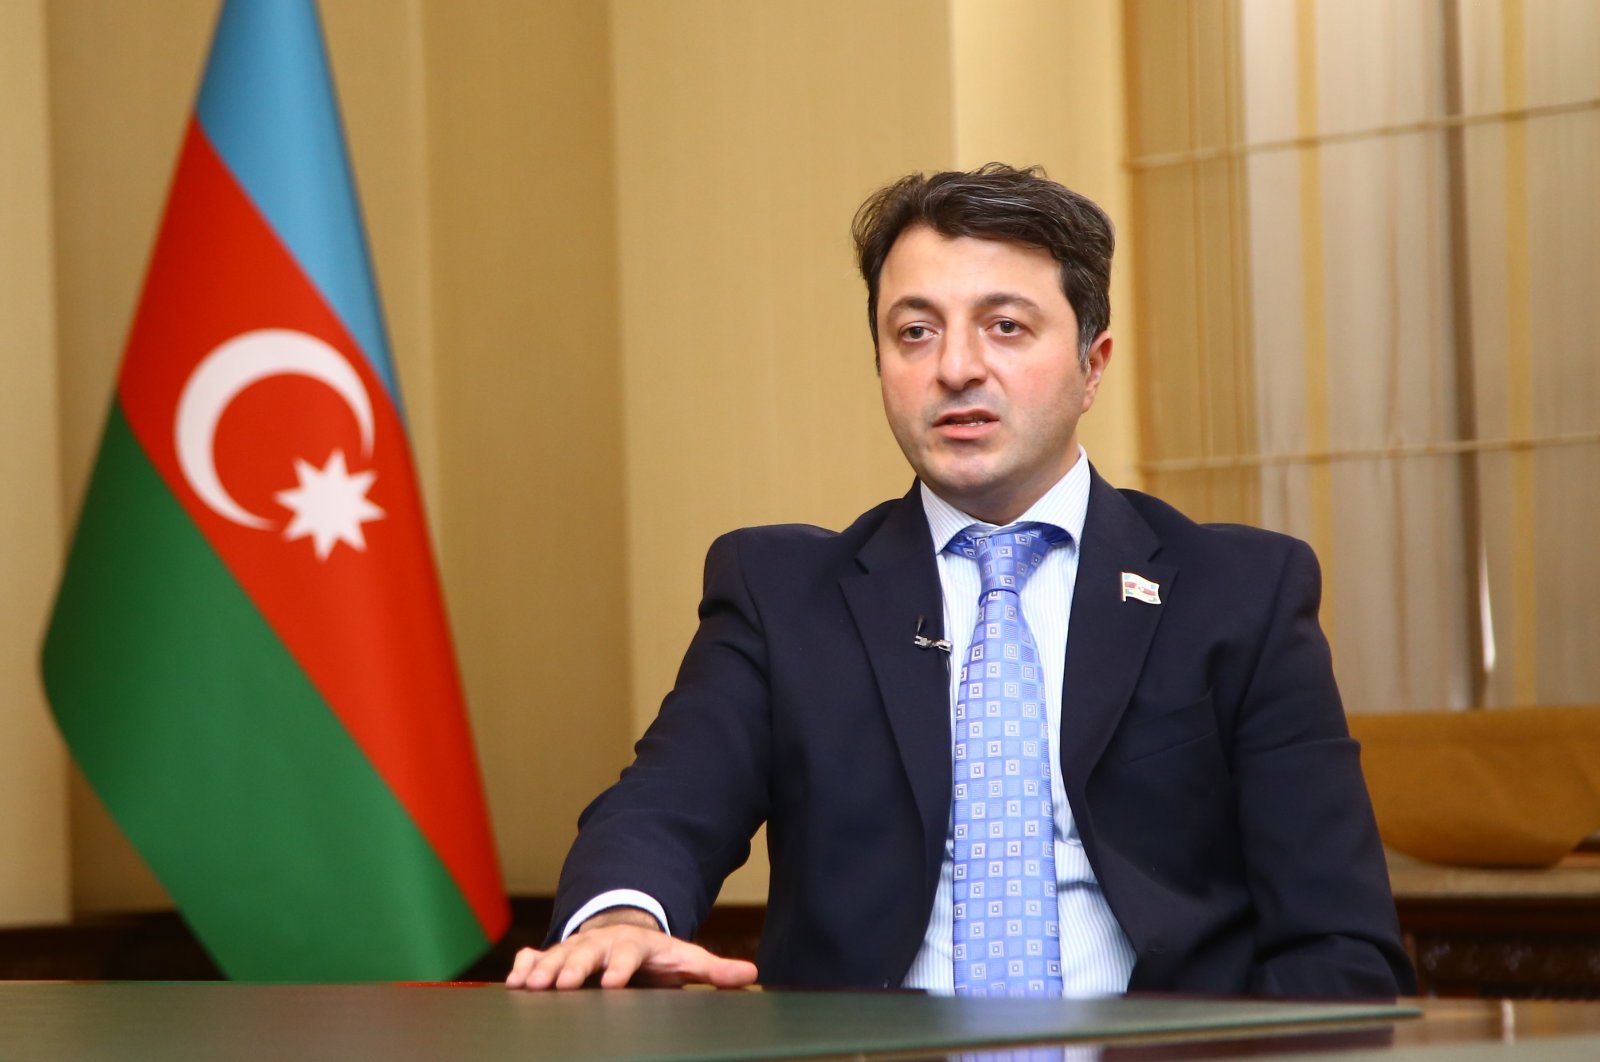 Tural Ganjaliyev, head of the Azerbaijani community of the Nagorno-Karabakh region, speaks in an interview with Anadolu Agency (AA), Oct. 9, 2020. (AA Photo)